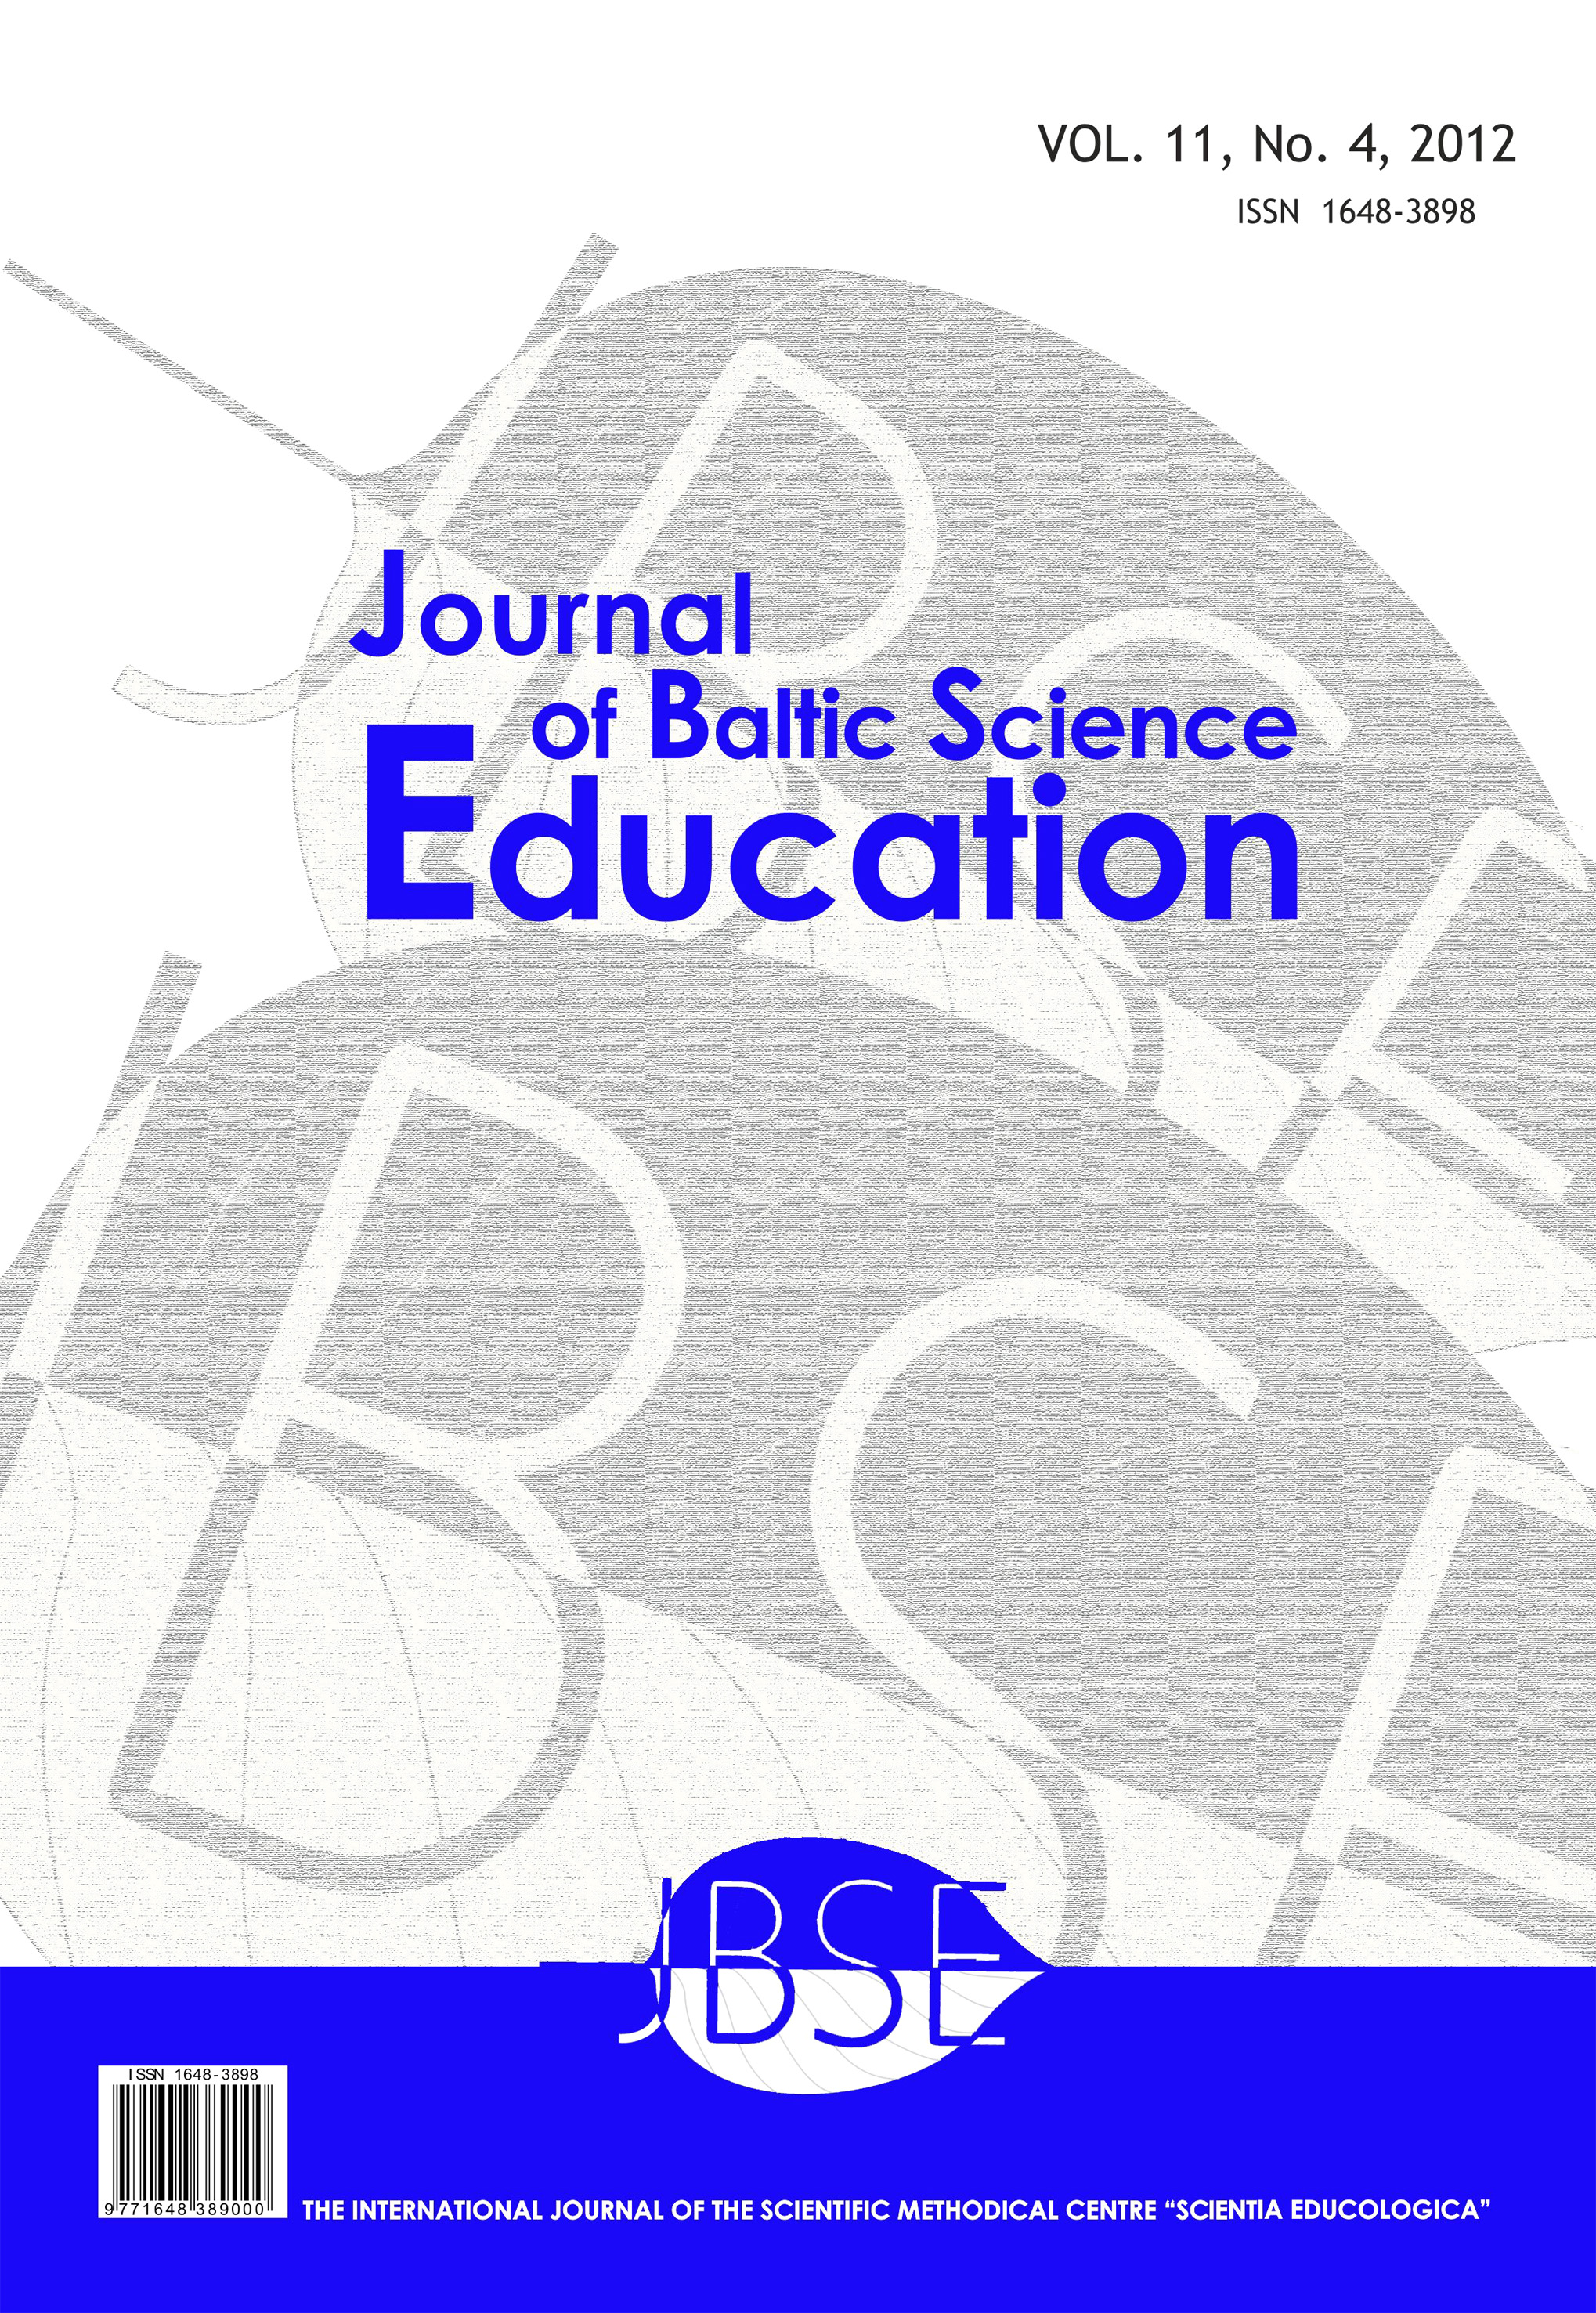 SCIENCE TEACHERS’ BELIEFS AS BARRIERS TO IMPLEMENTATION OF CONSTRUCTIVIST-BASED EDUCATION REFORM